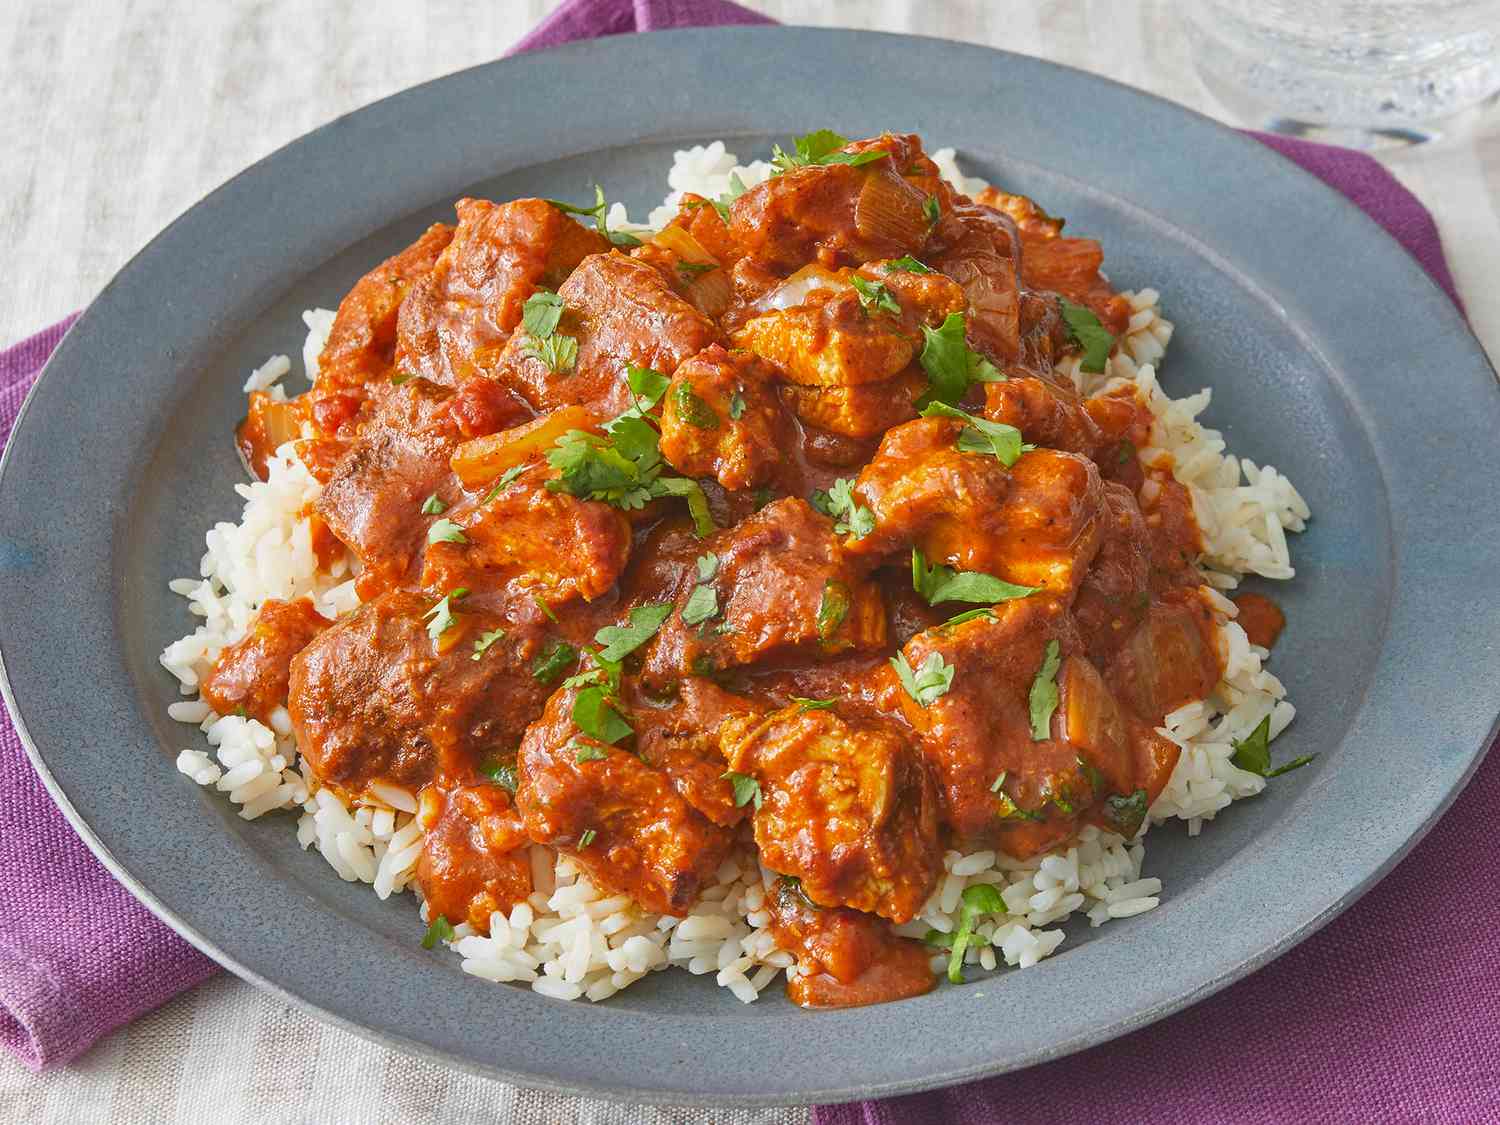 Overhead view on a plate of rice topped with chicken tikka masala